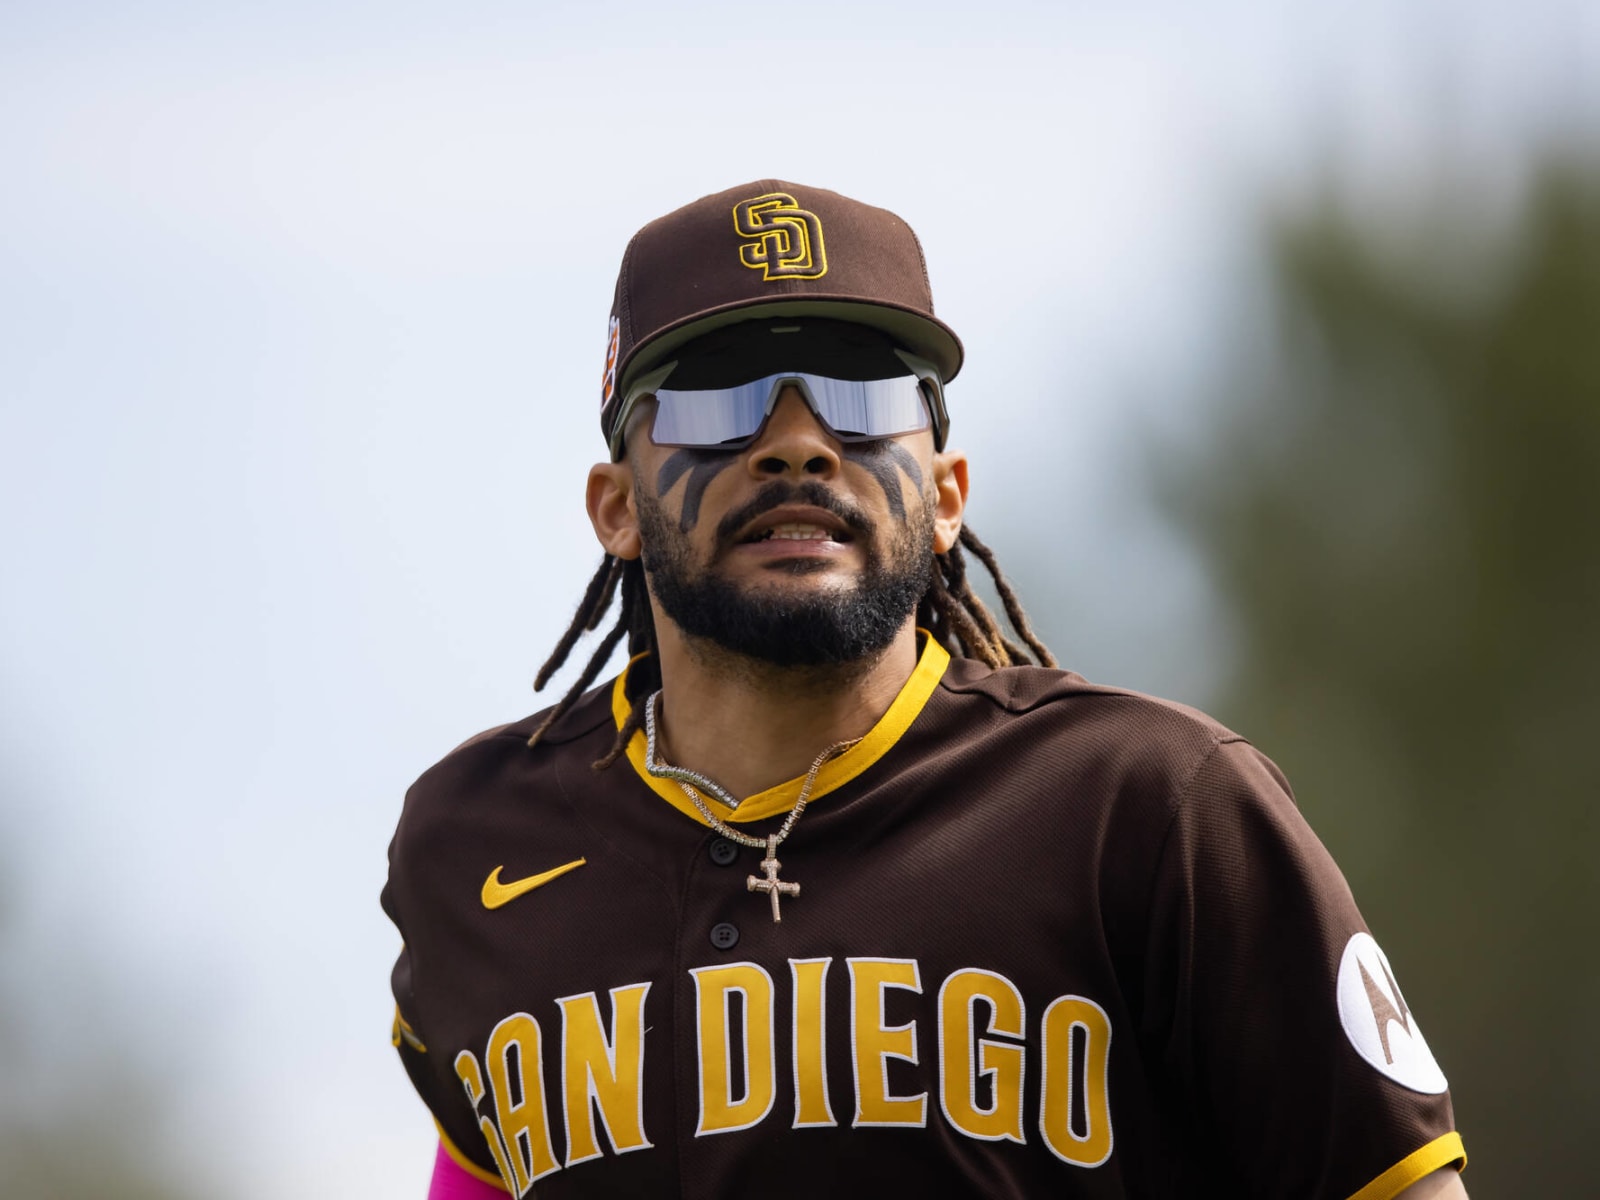 Padres star outfielder to begin rehab assignment